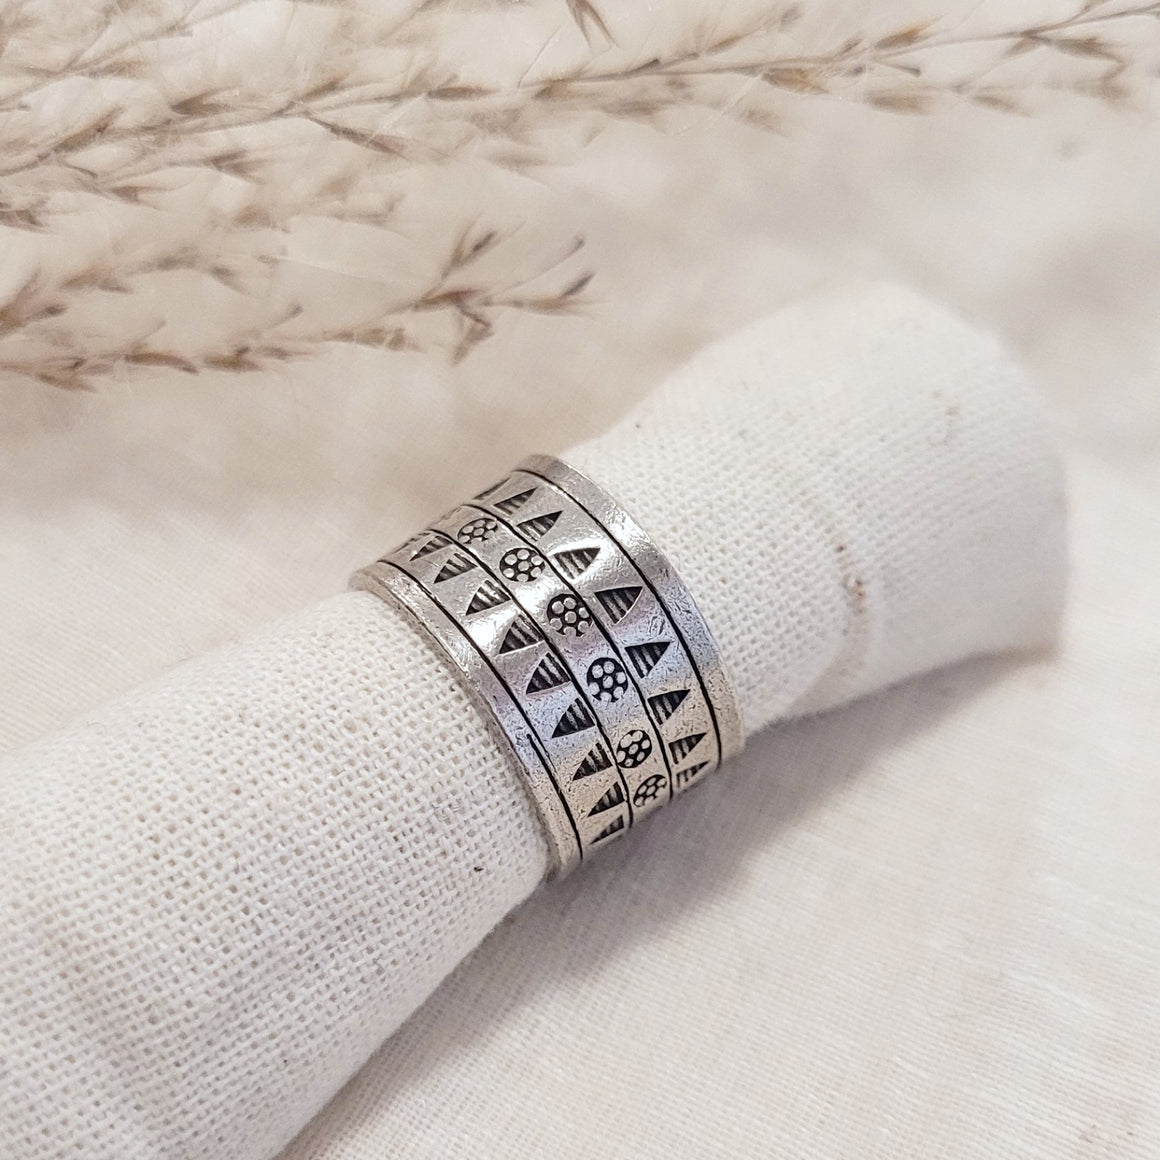 Sterling silver triangular and floral patterned band